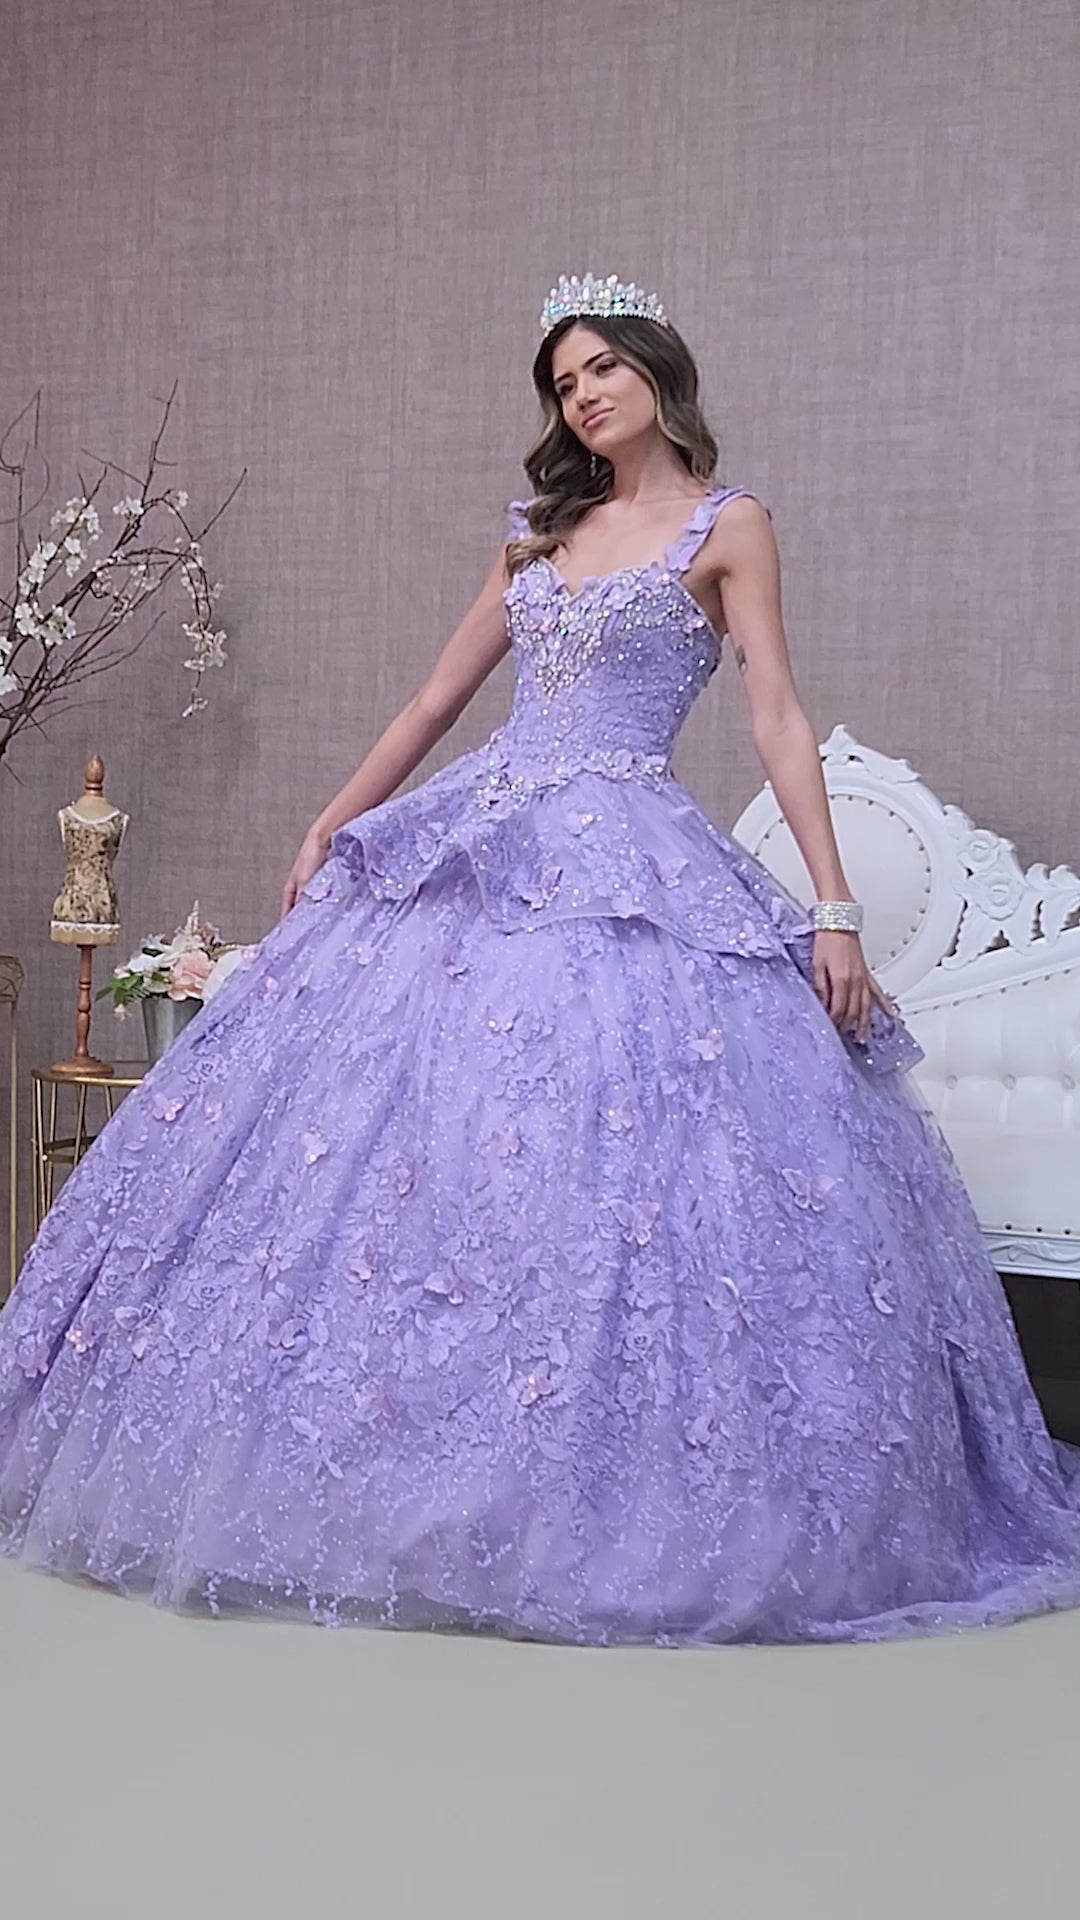 Jewel Mesh Quinceanera Gown w/ 3-D Butterfly Appliques and Long Mesh Capes by Elizabeth K - GL3104